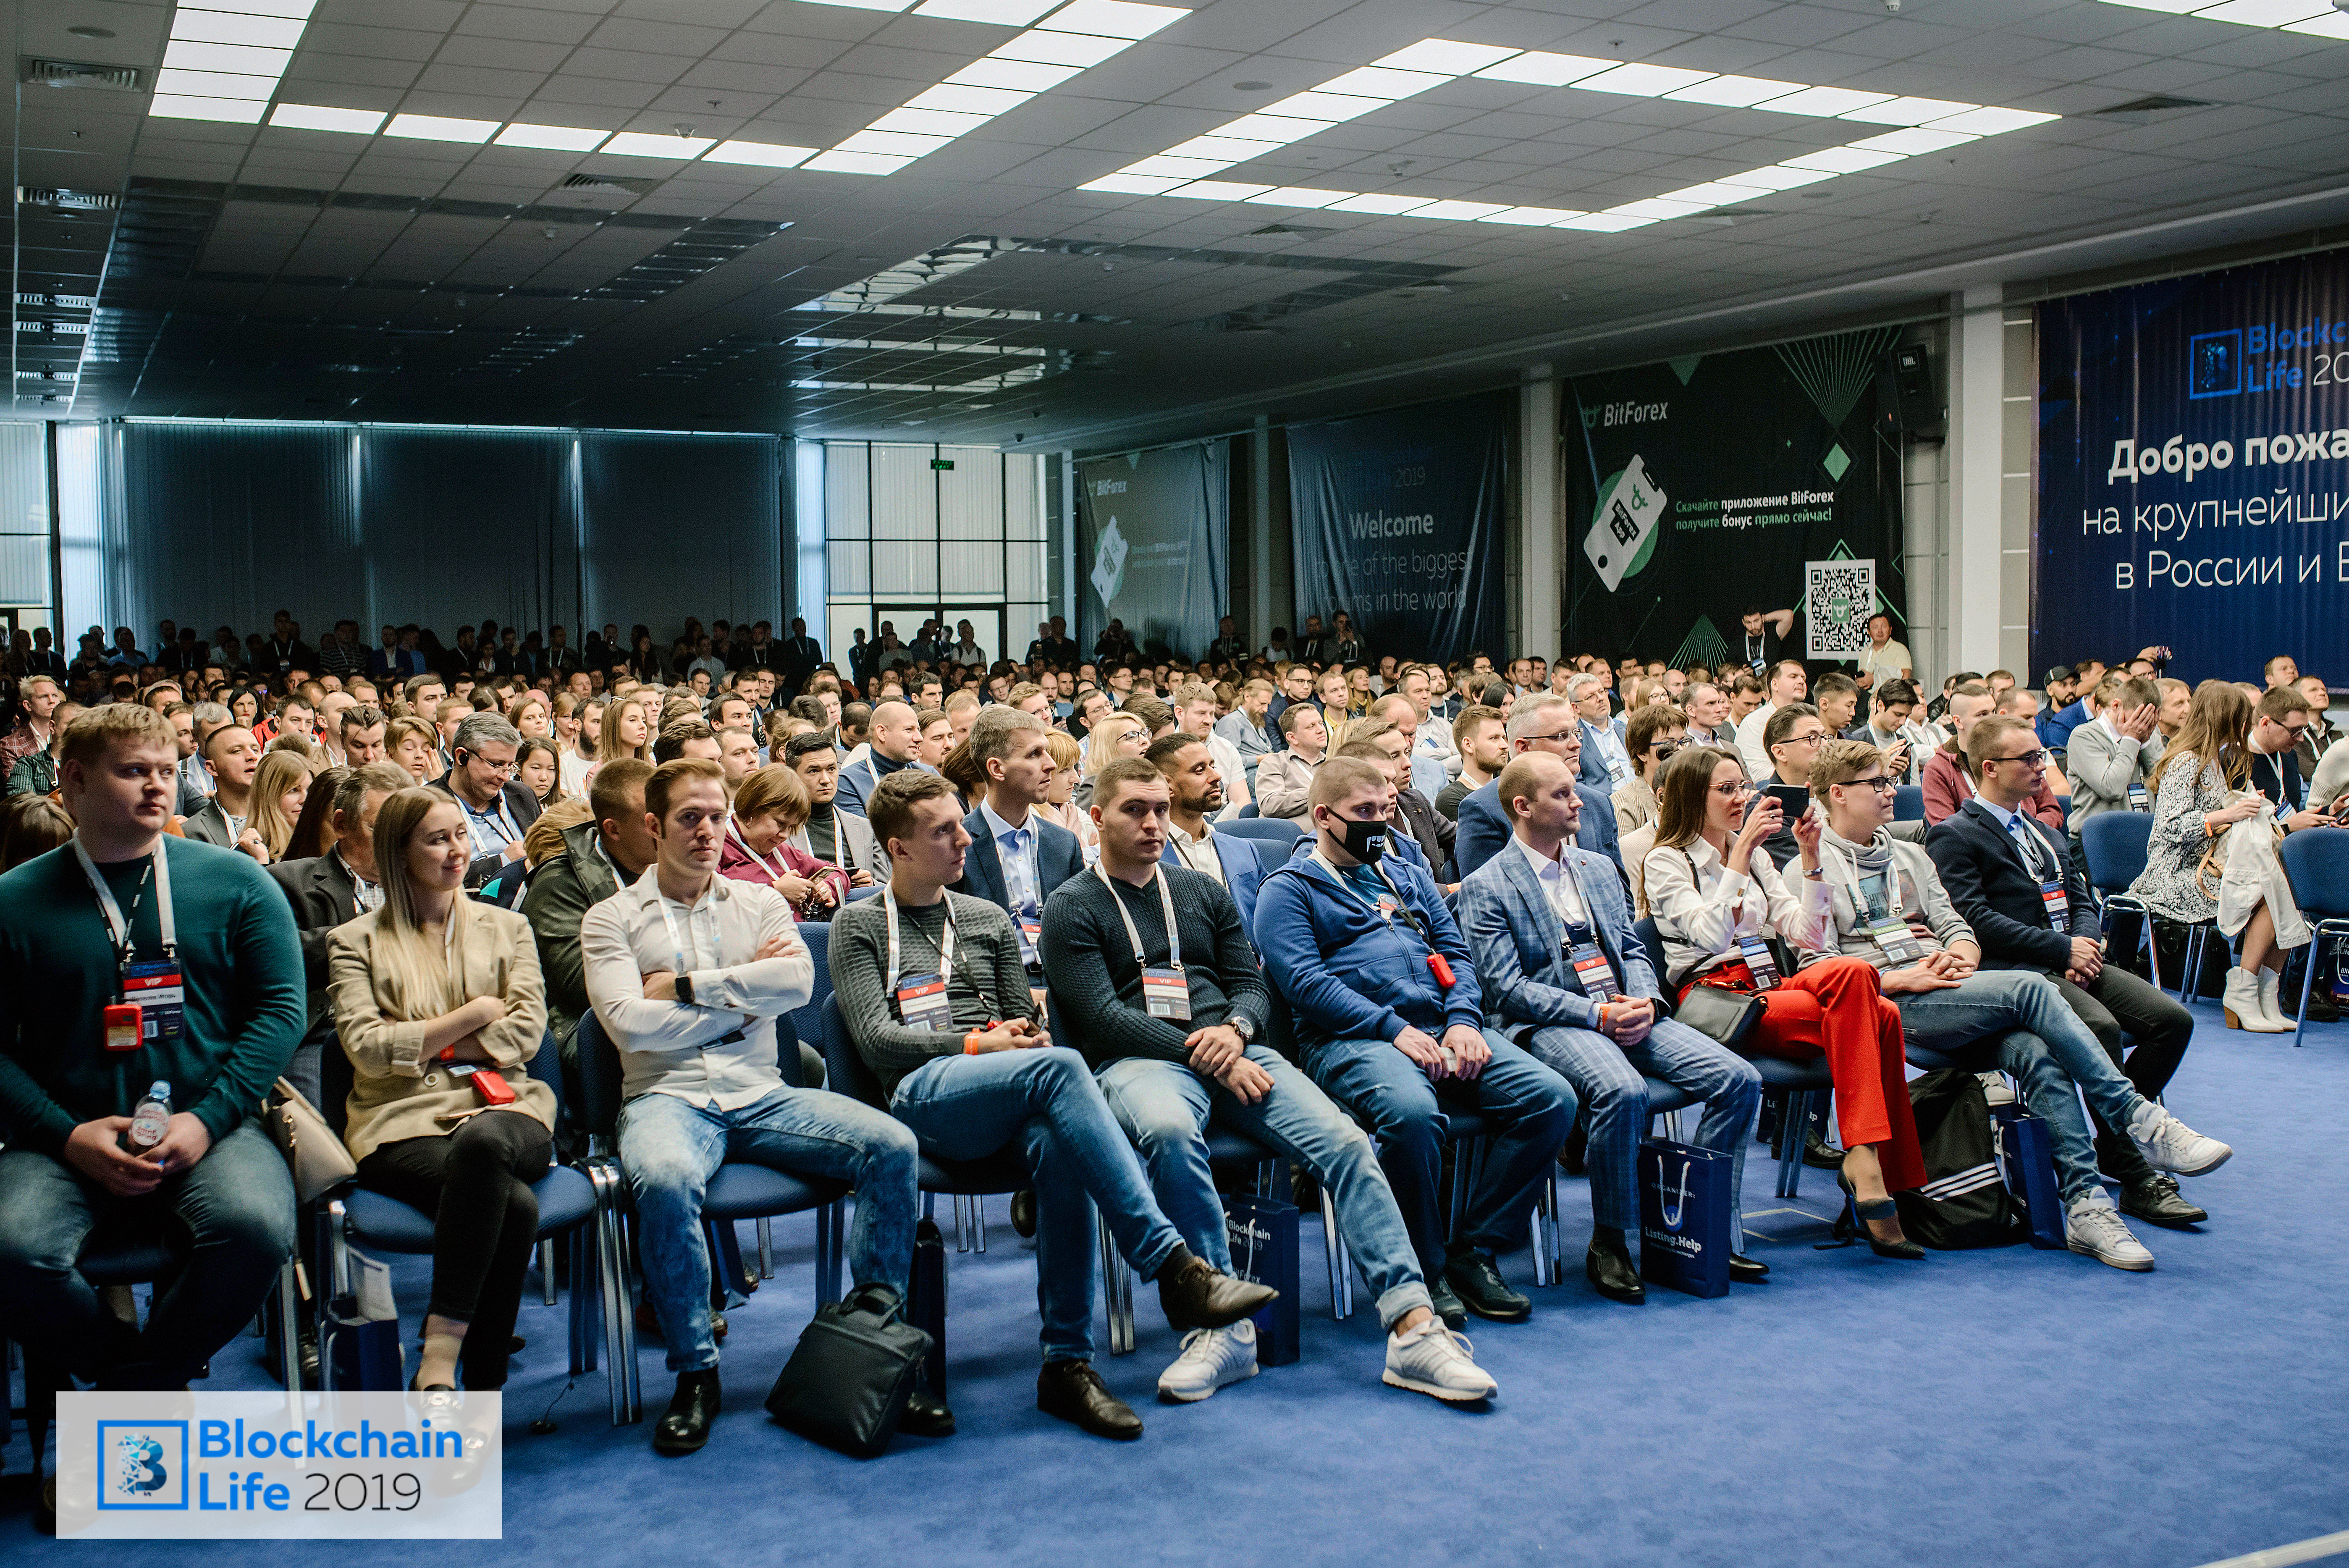 Blockchain Life 2019 was successfully held in Moscow 9